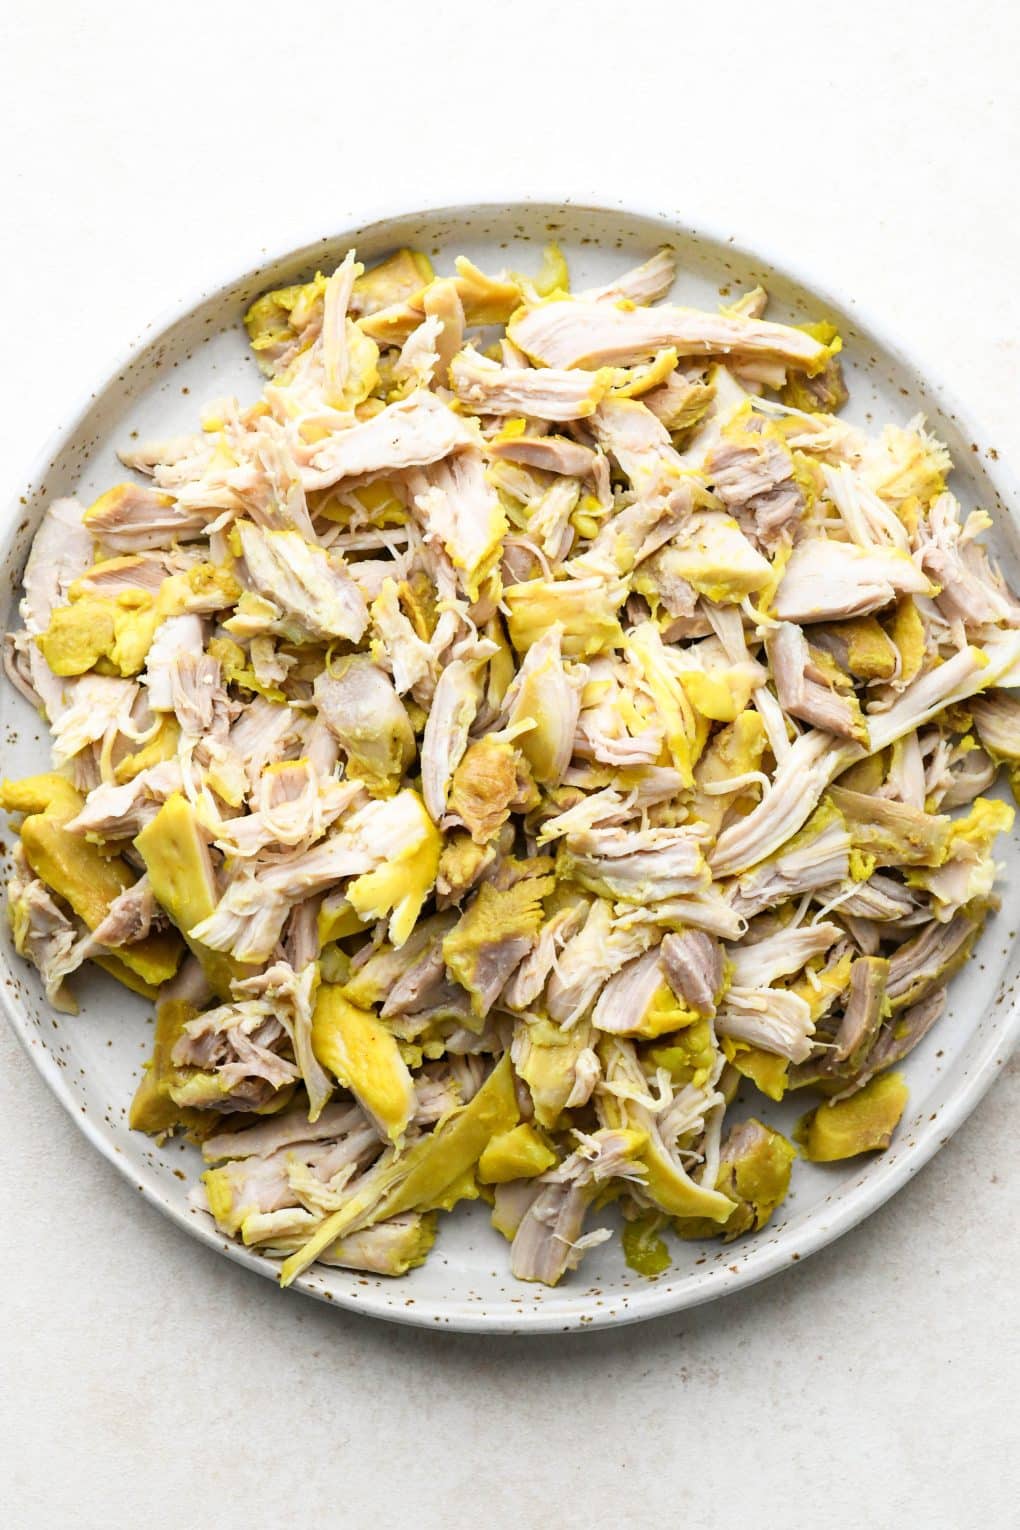 How to make Anti Inflammatory Turmeric Chicken Soup: Cooked chicken removed from the pot and shredded.